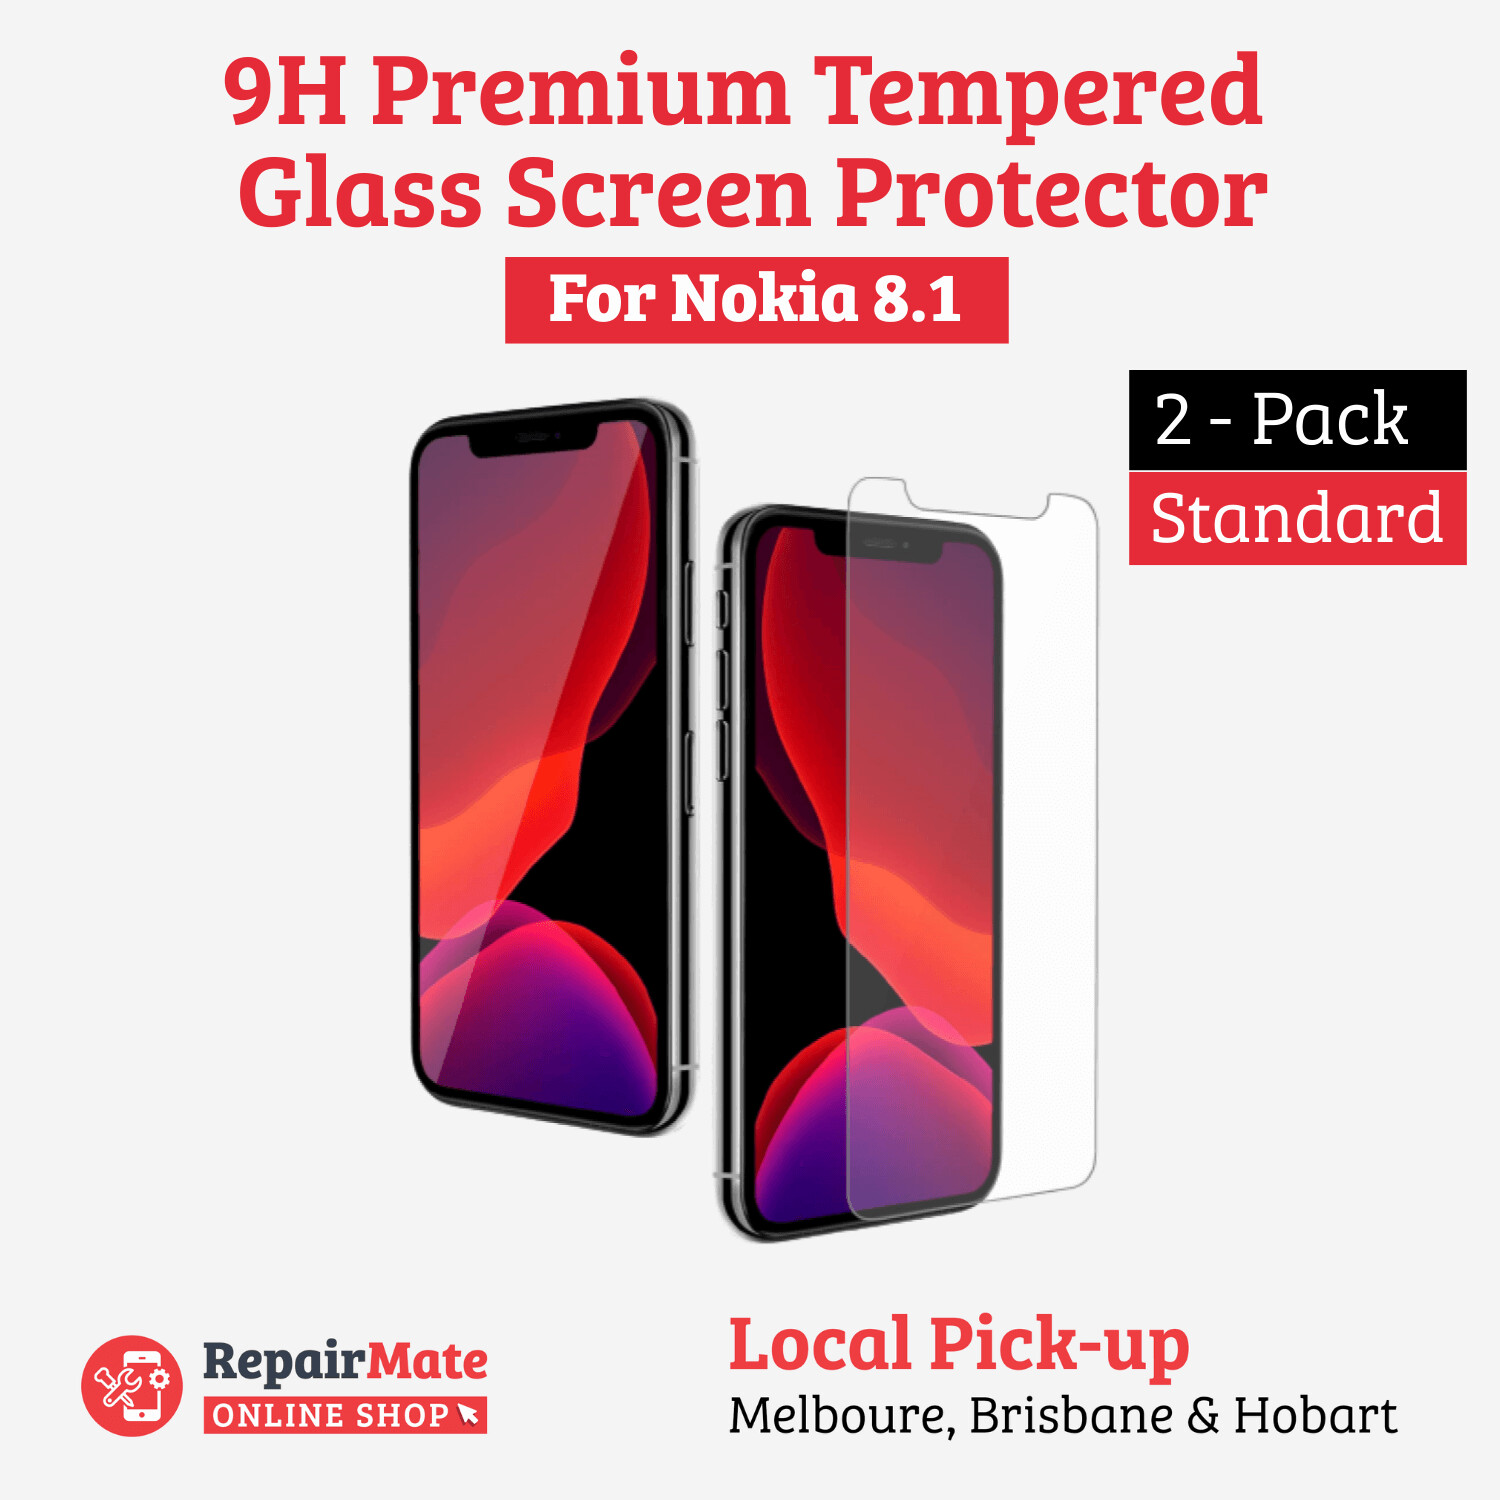 Nokia 8.1 9H Premium Tempered Glass Screen Protector [2 Pack]